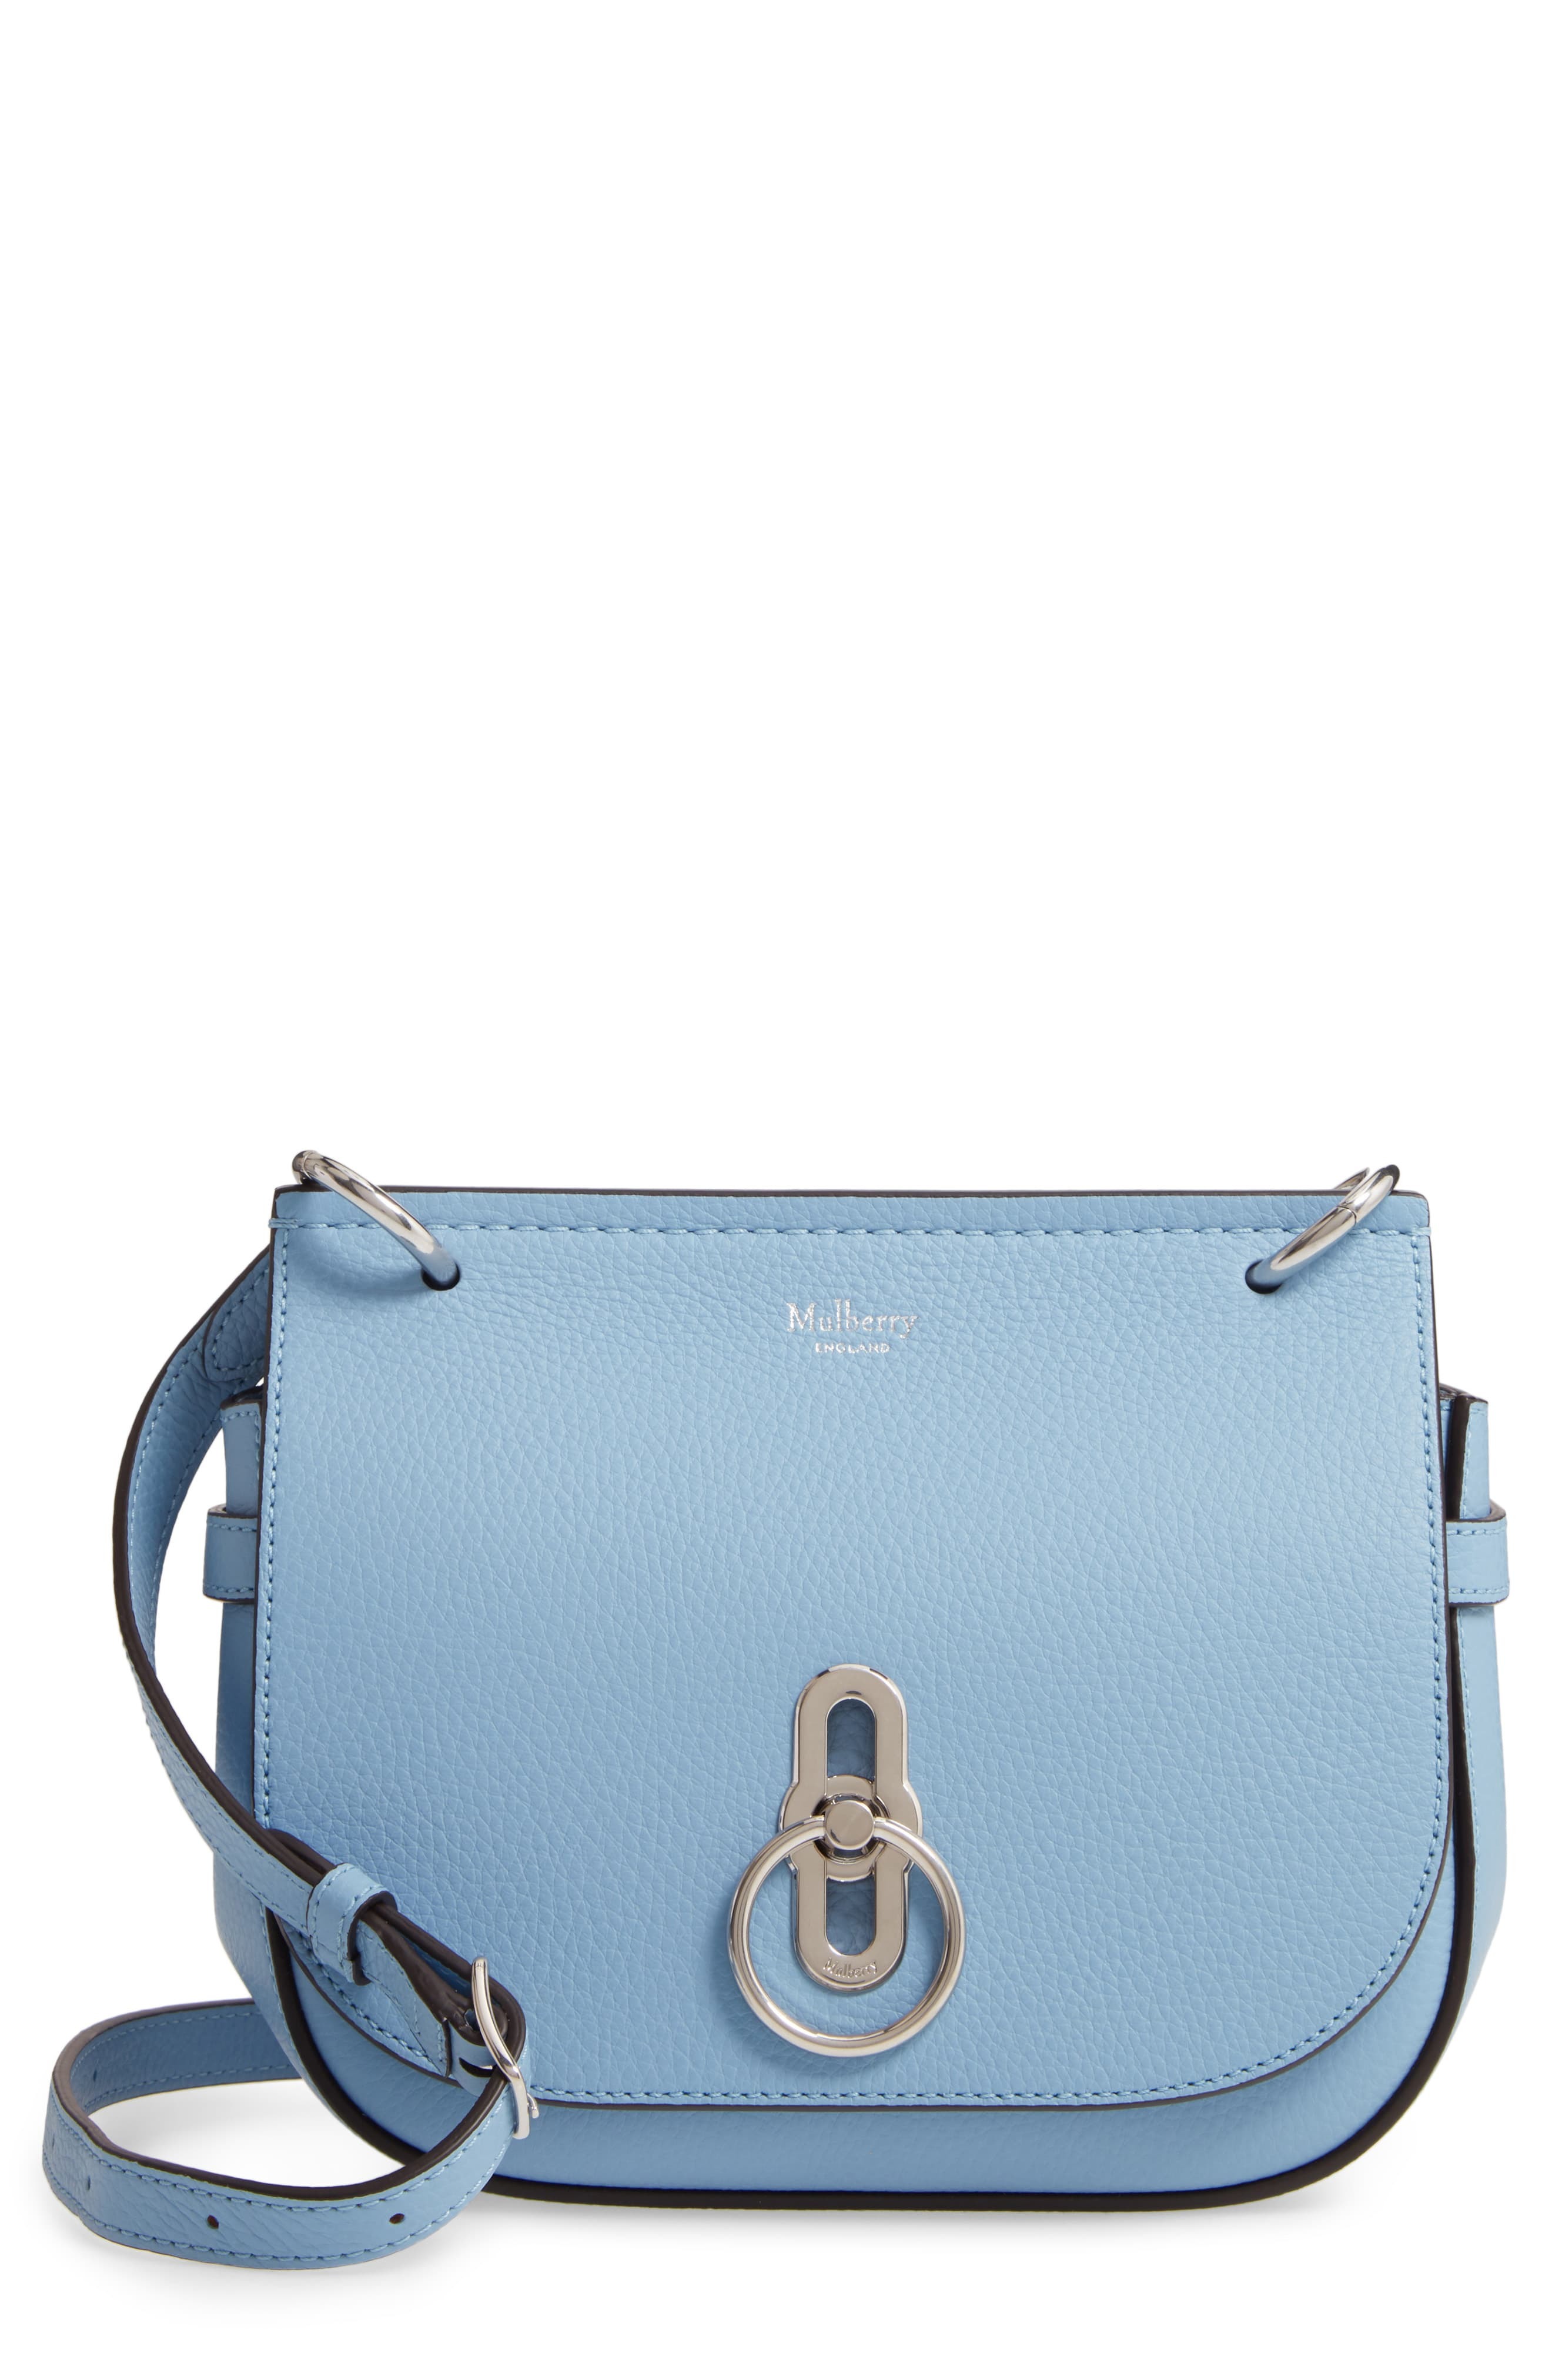 Mulberry Small Amberley Leather Crossbody Bag, $925 | Nordstrom | Lookastic